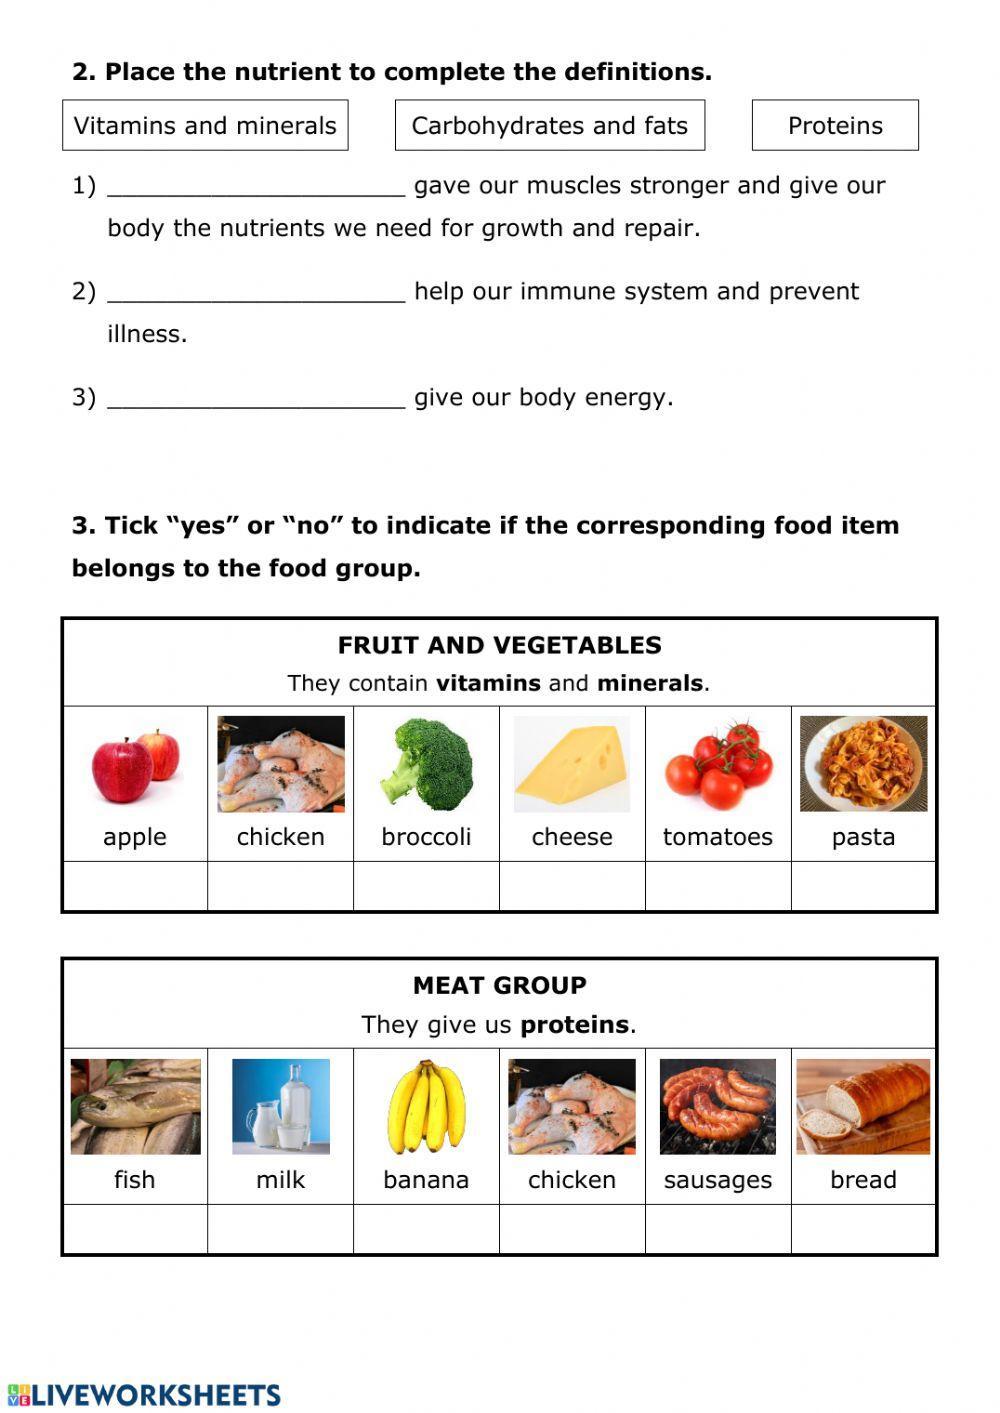 NUTRITION 7 - Food and nutrition